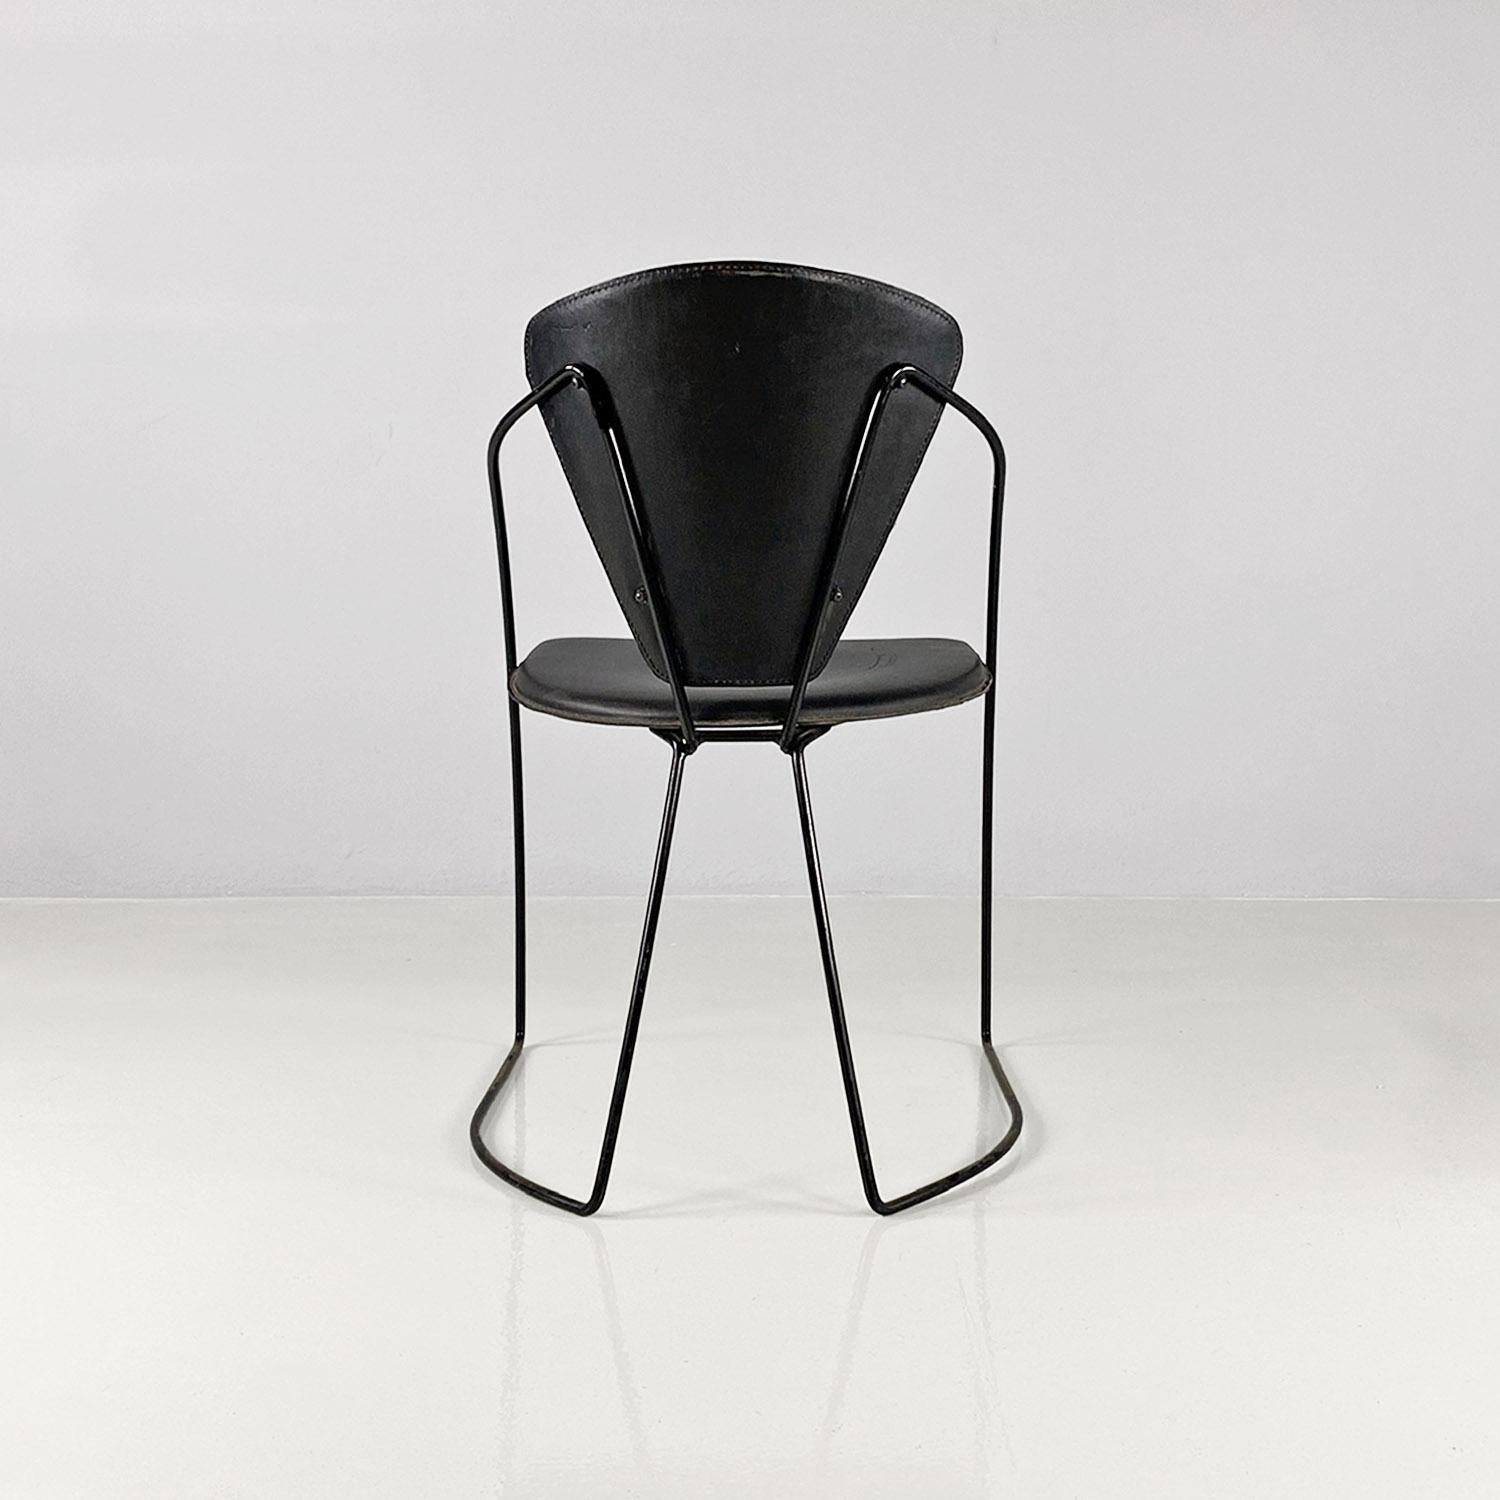 Italian modern black metal and leather chairs, 1980s For Sale 3